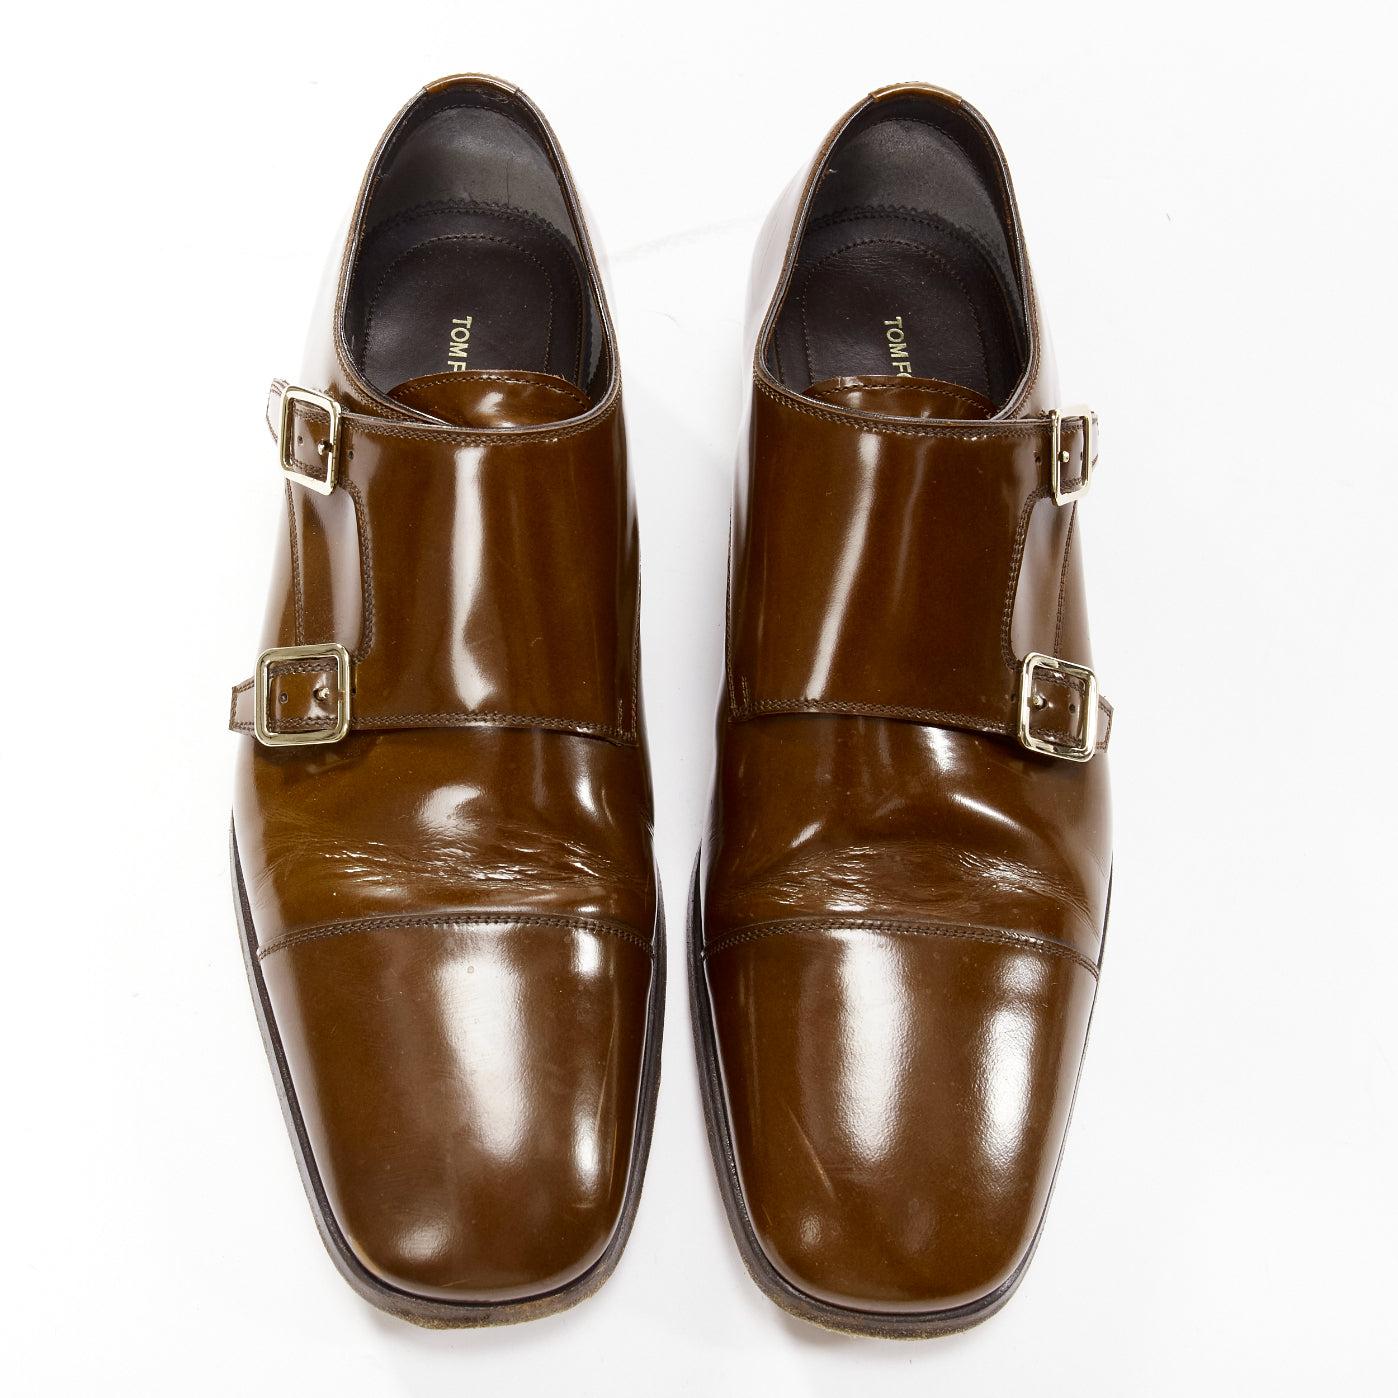 TOM FORD Spazzolato brown leather buckles monk strap loafers UK7 EU41 In Fair Condition For Sale In Hong Kong, NT